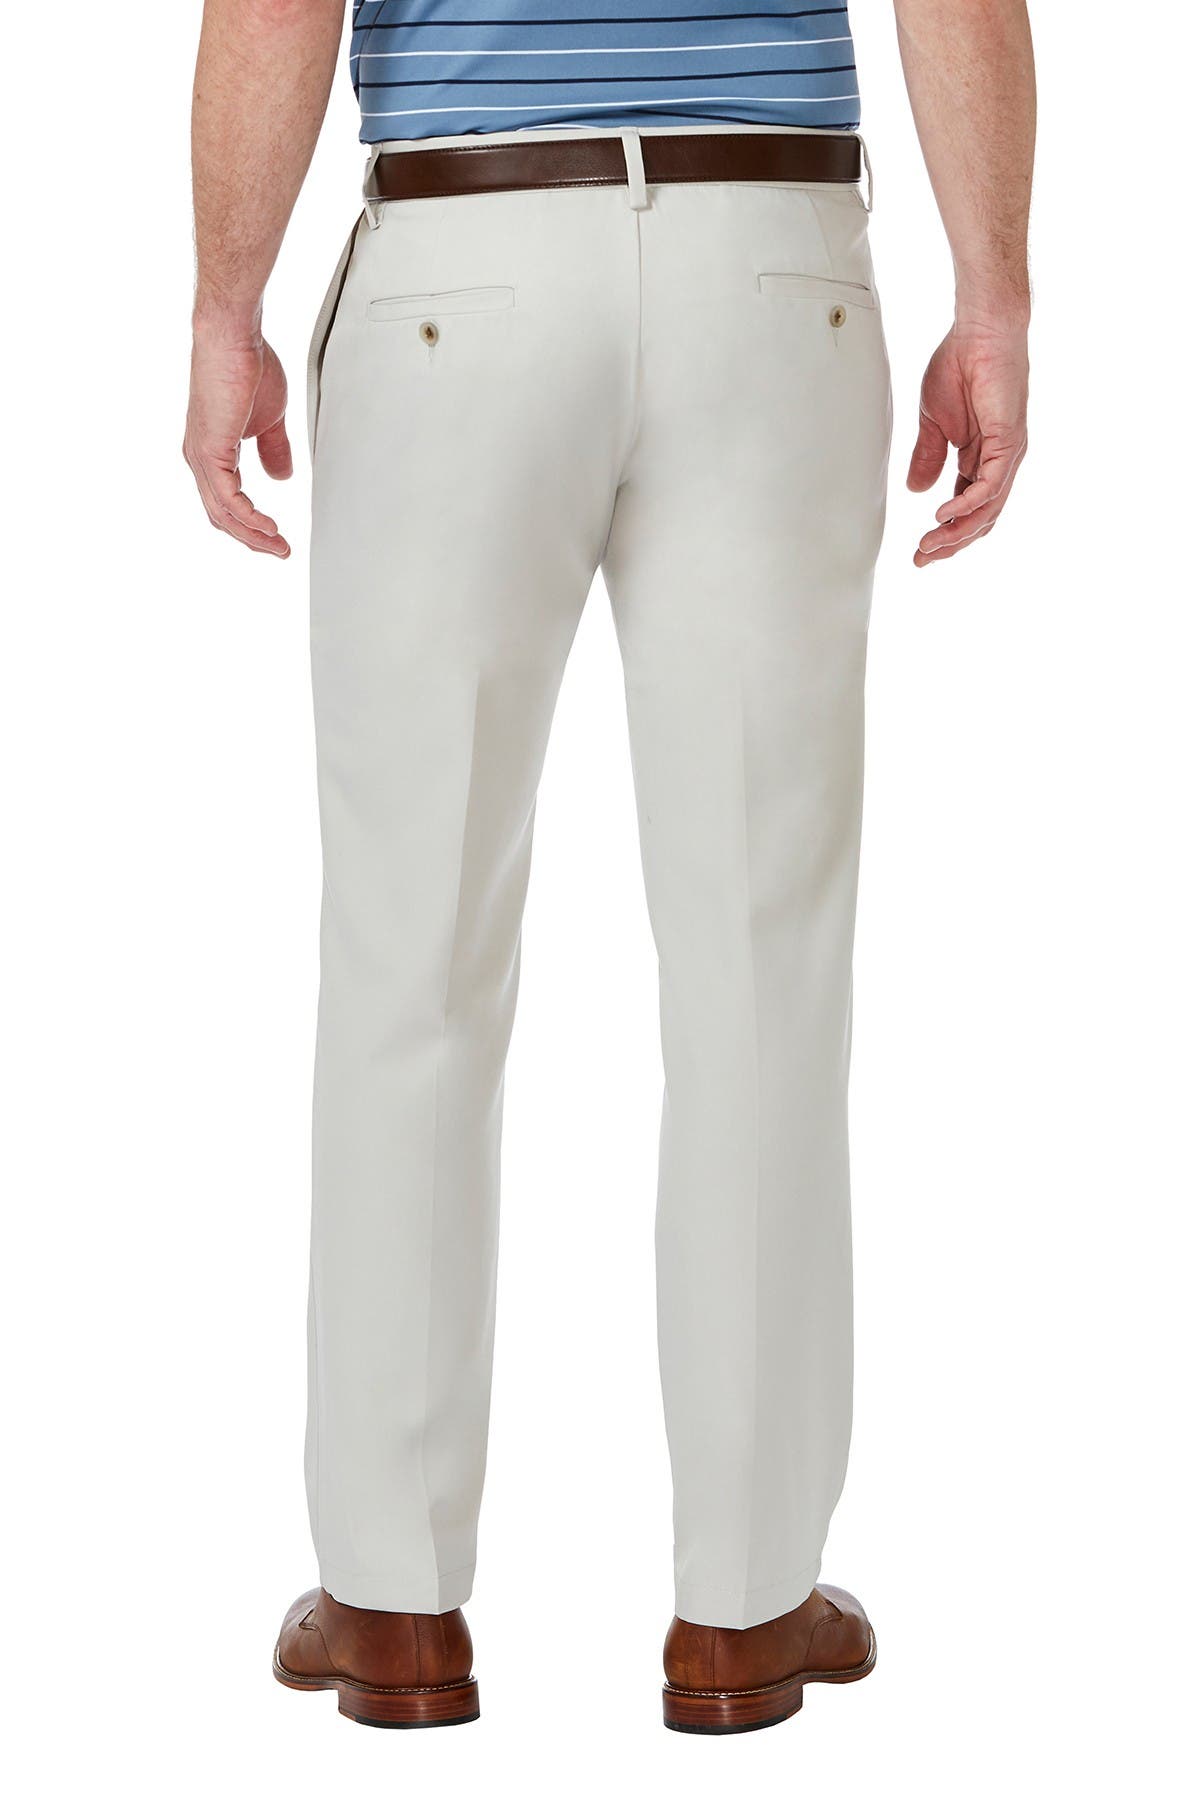 Haggar Cool 18 Pro Straight Fit Flat Front Pants In Light Beige